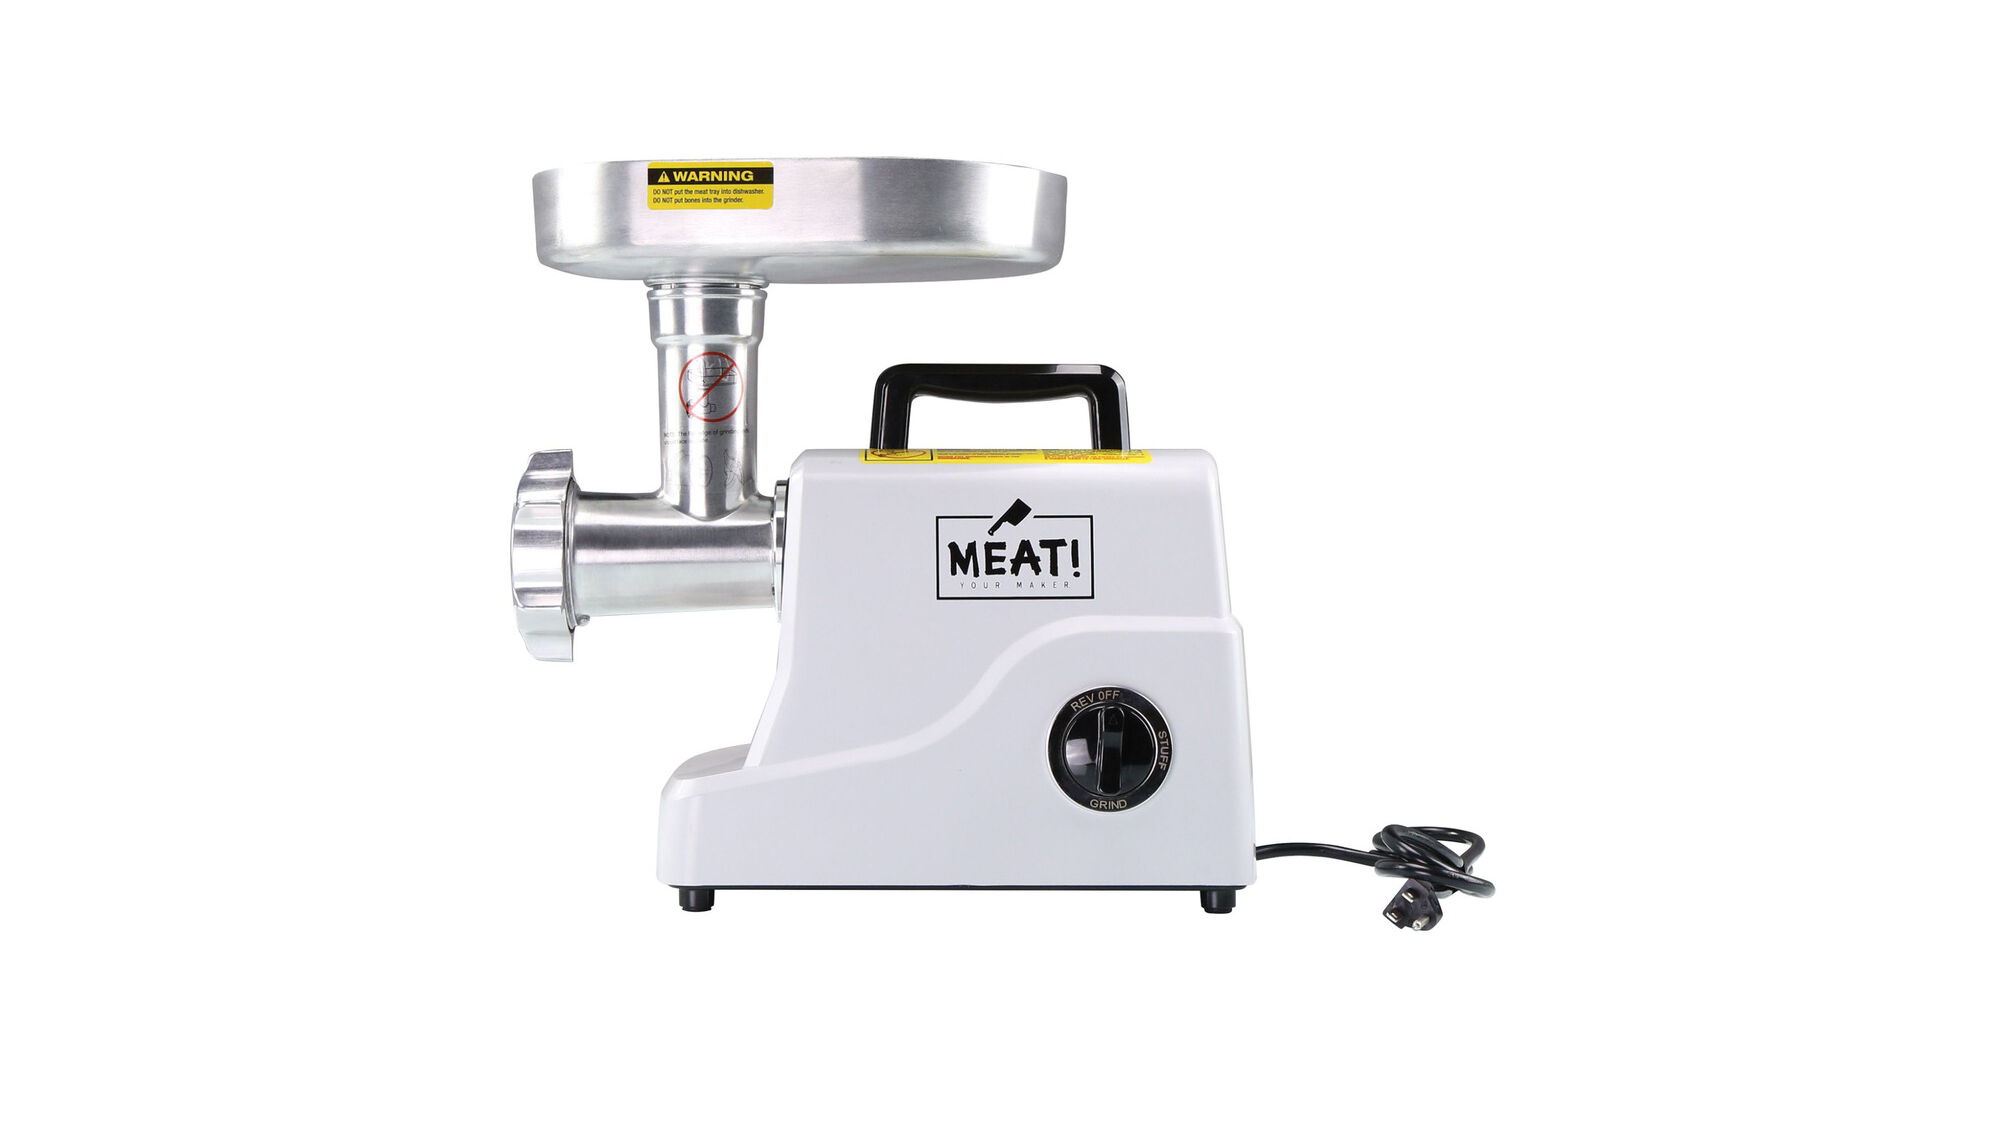 Meat 500 Watt #12 Grinder - Food Processing at Academy Sports